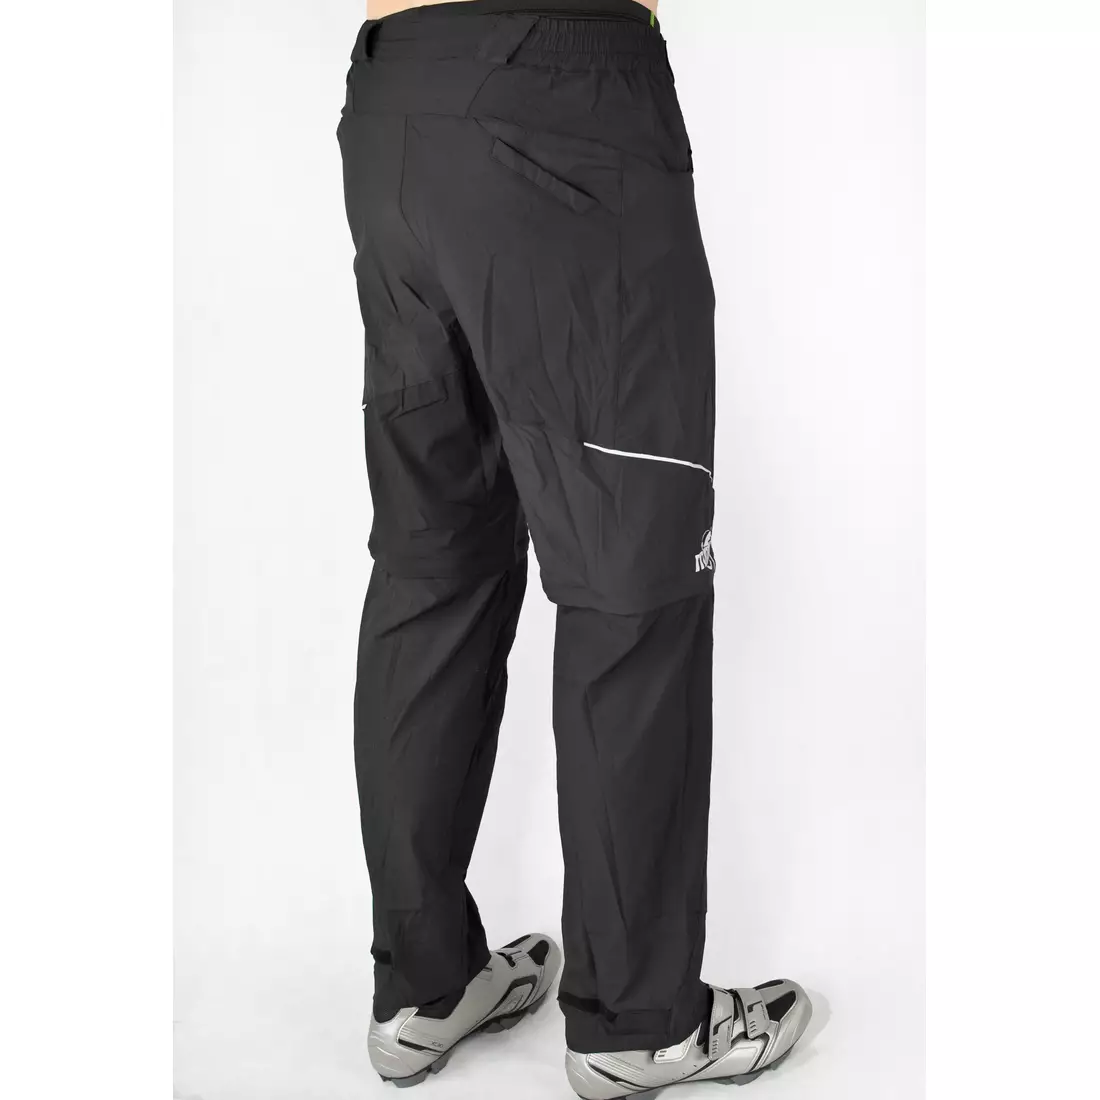 MikeSPORT HIKE cycling pants with detachable legs, COOLMAX insert.